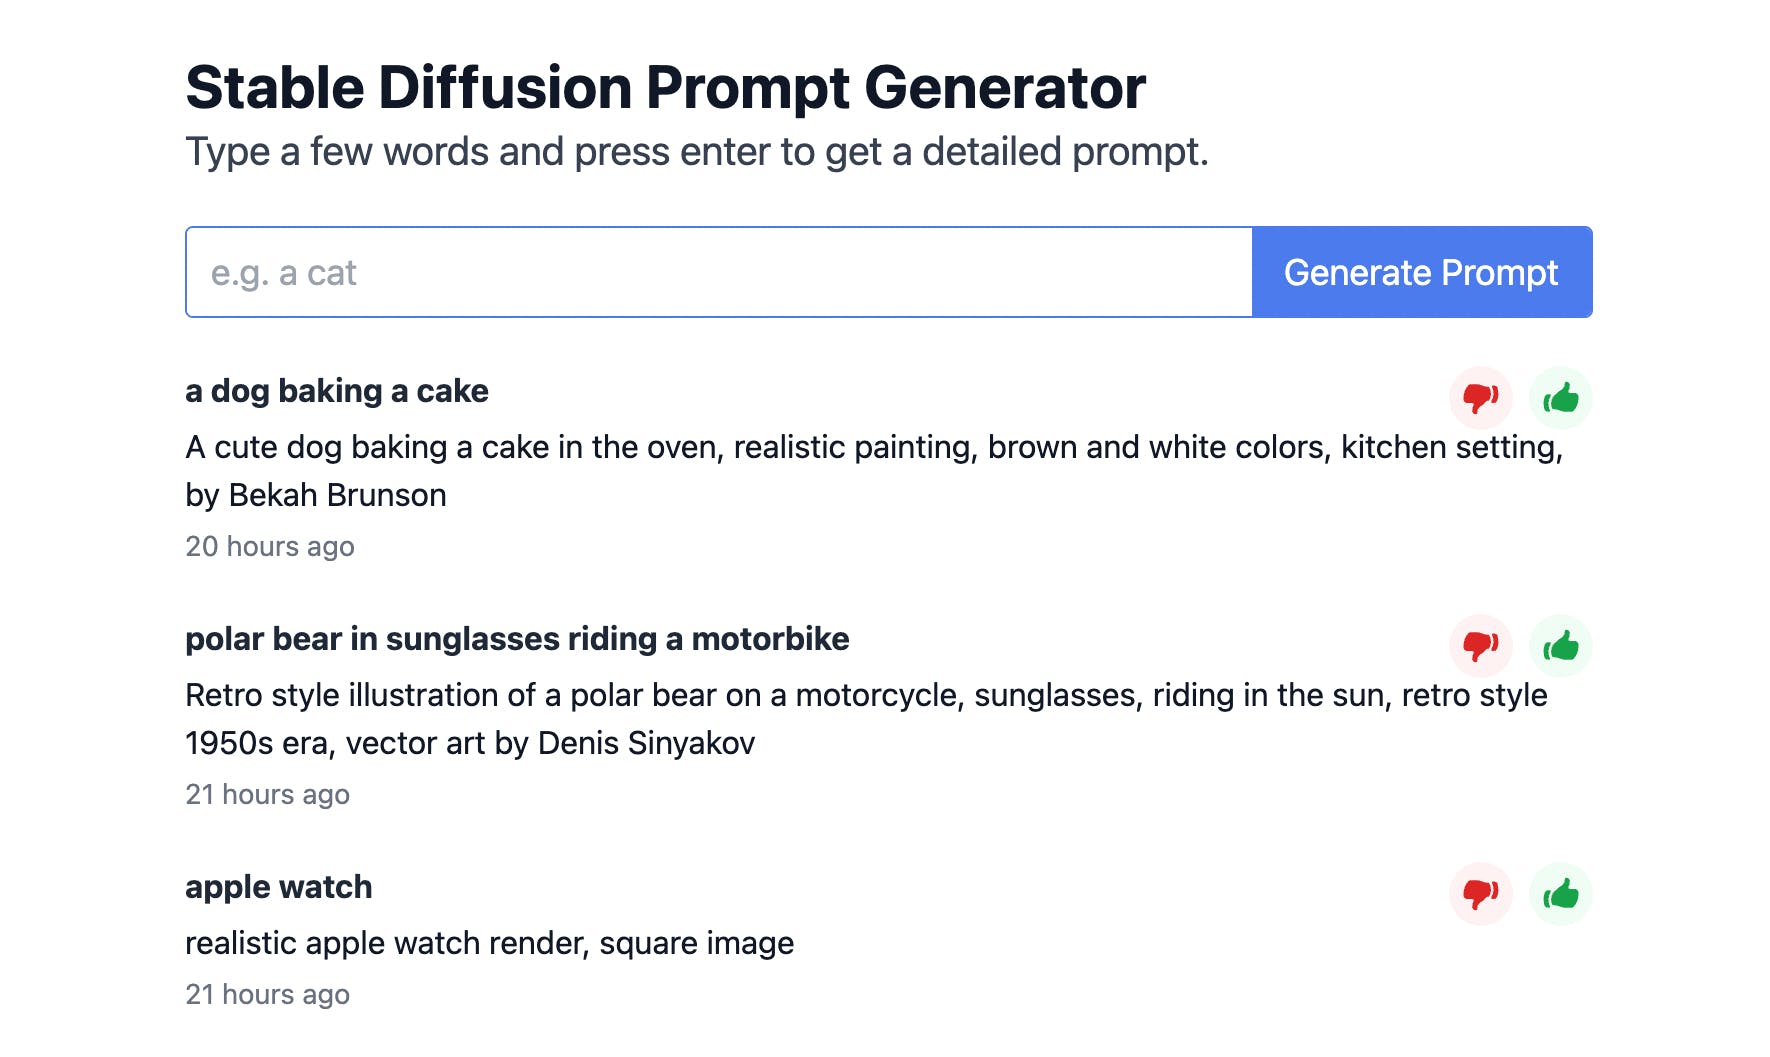 Stable Diffusion Prompt Generator media 1